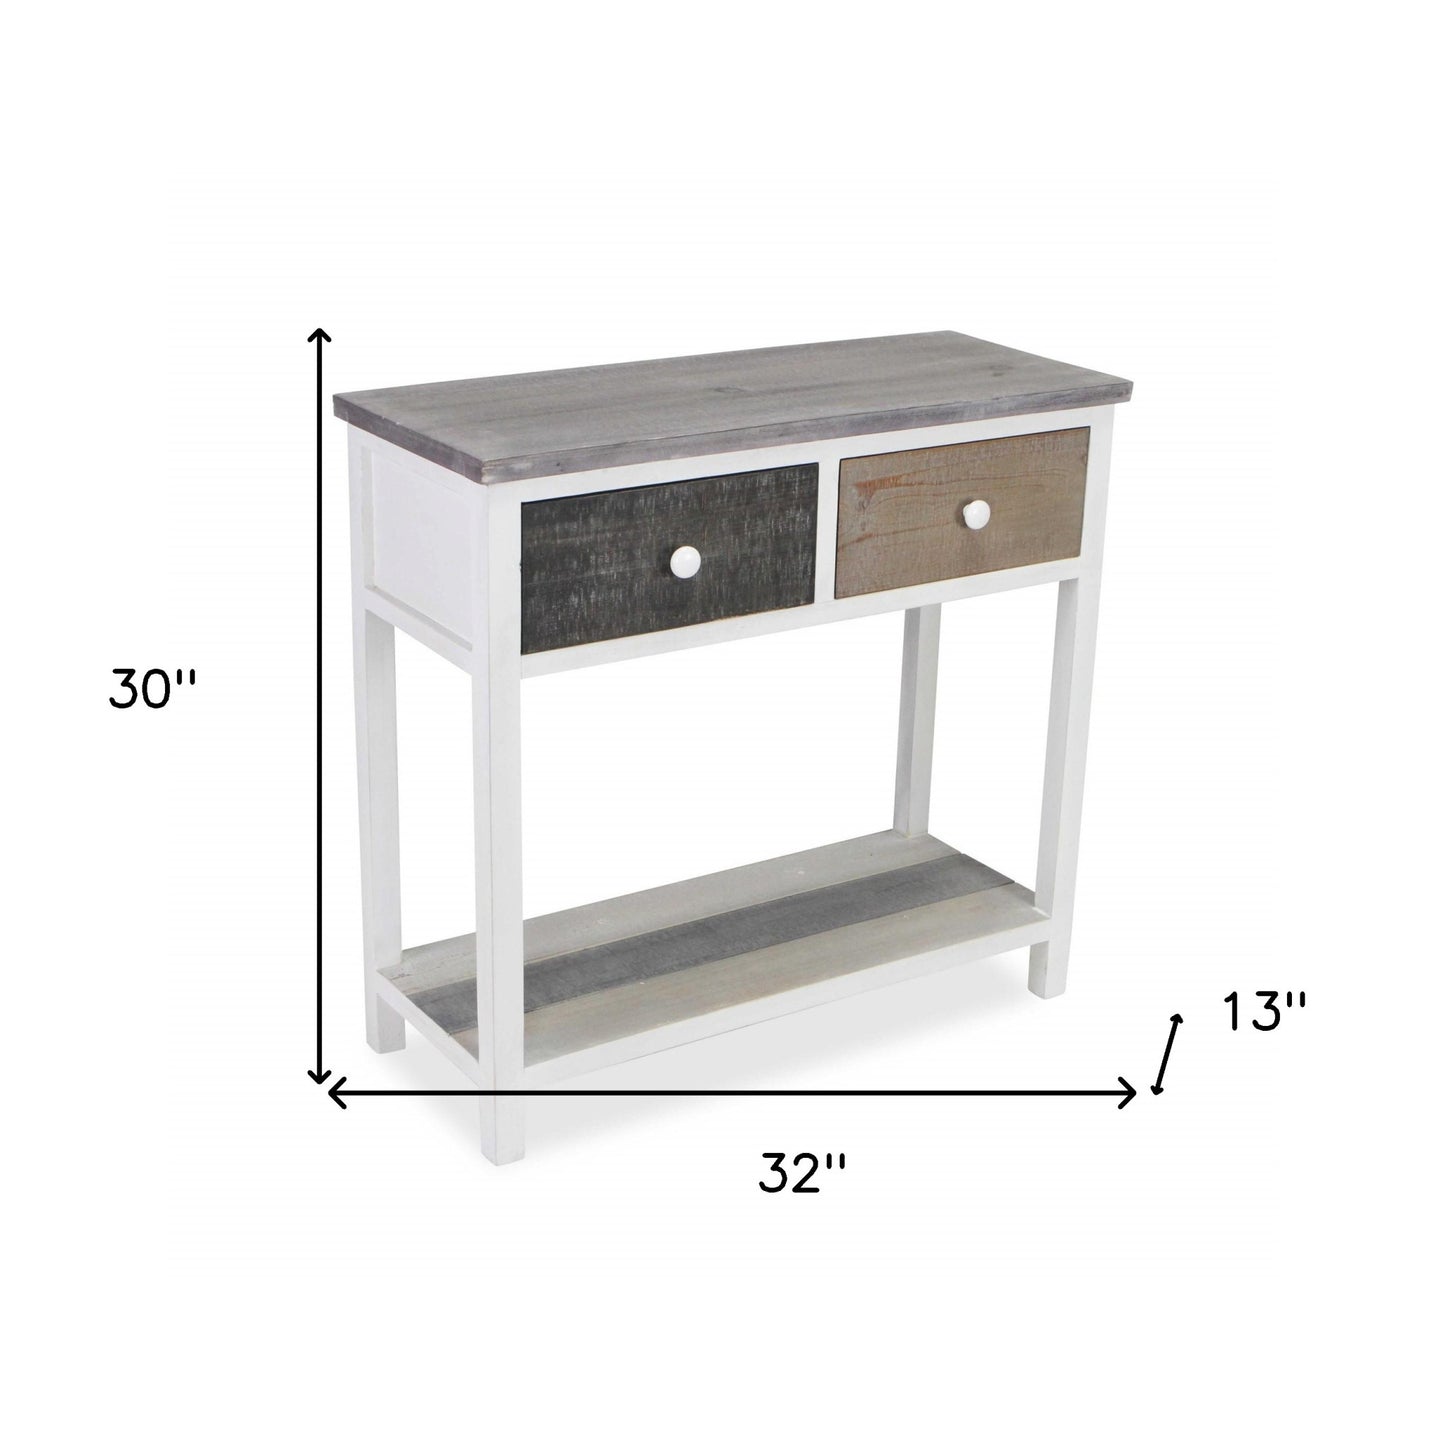 Distressed Gray And White Table With 2 Drawers And Bottom Shelf